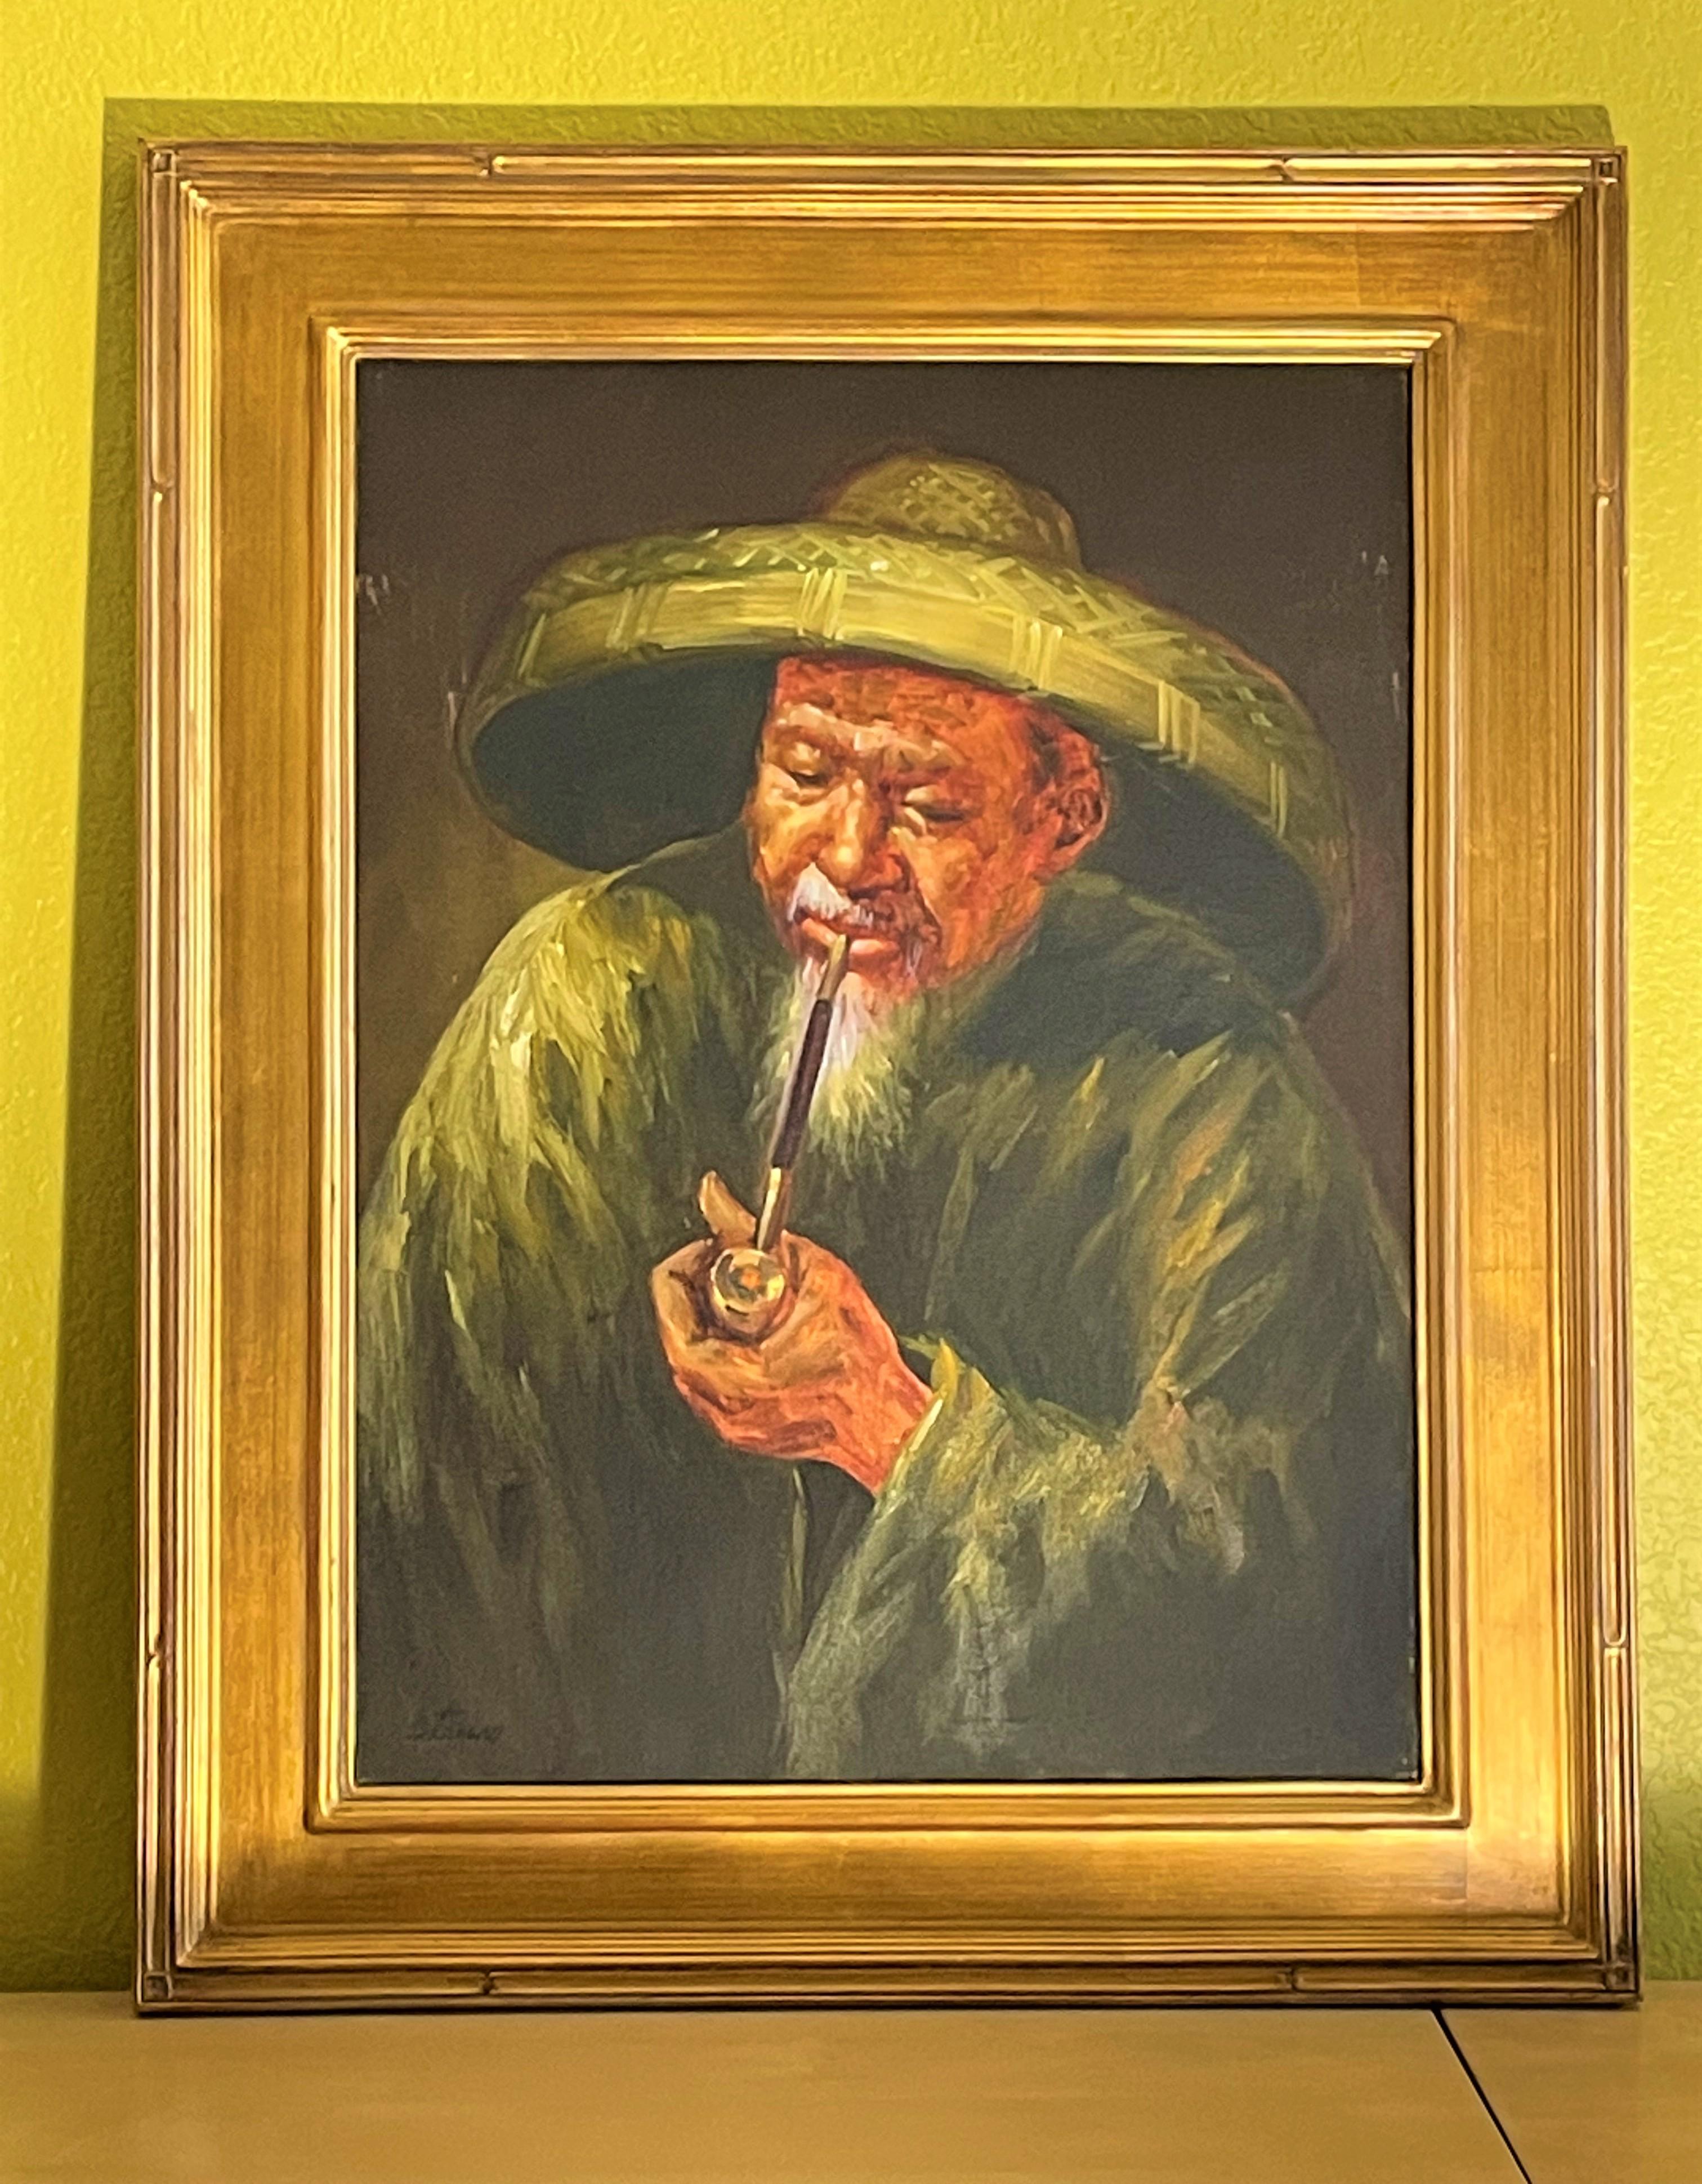 painting of old man smoking a pipe